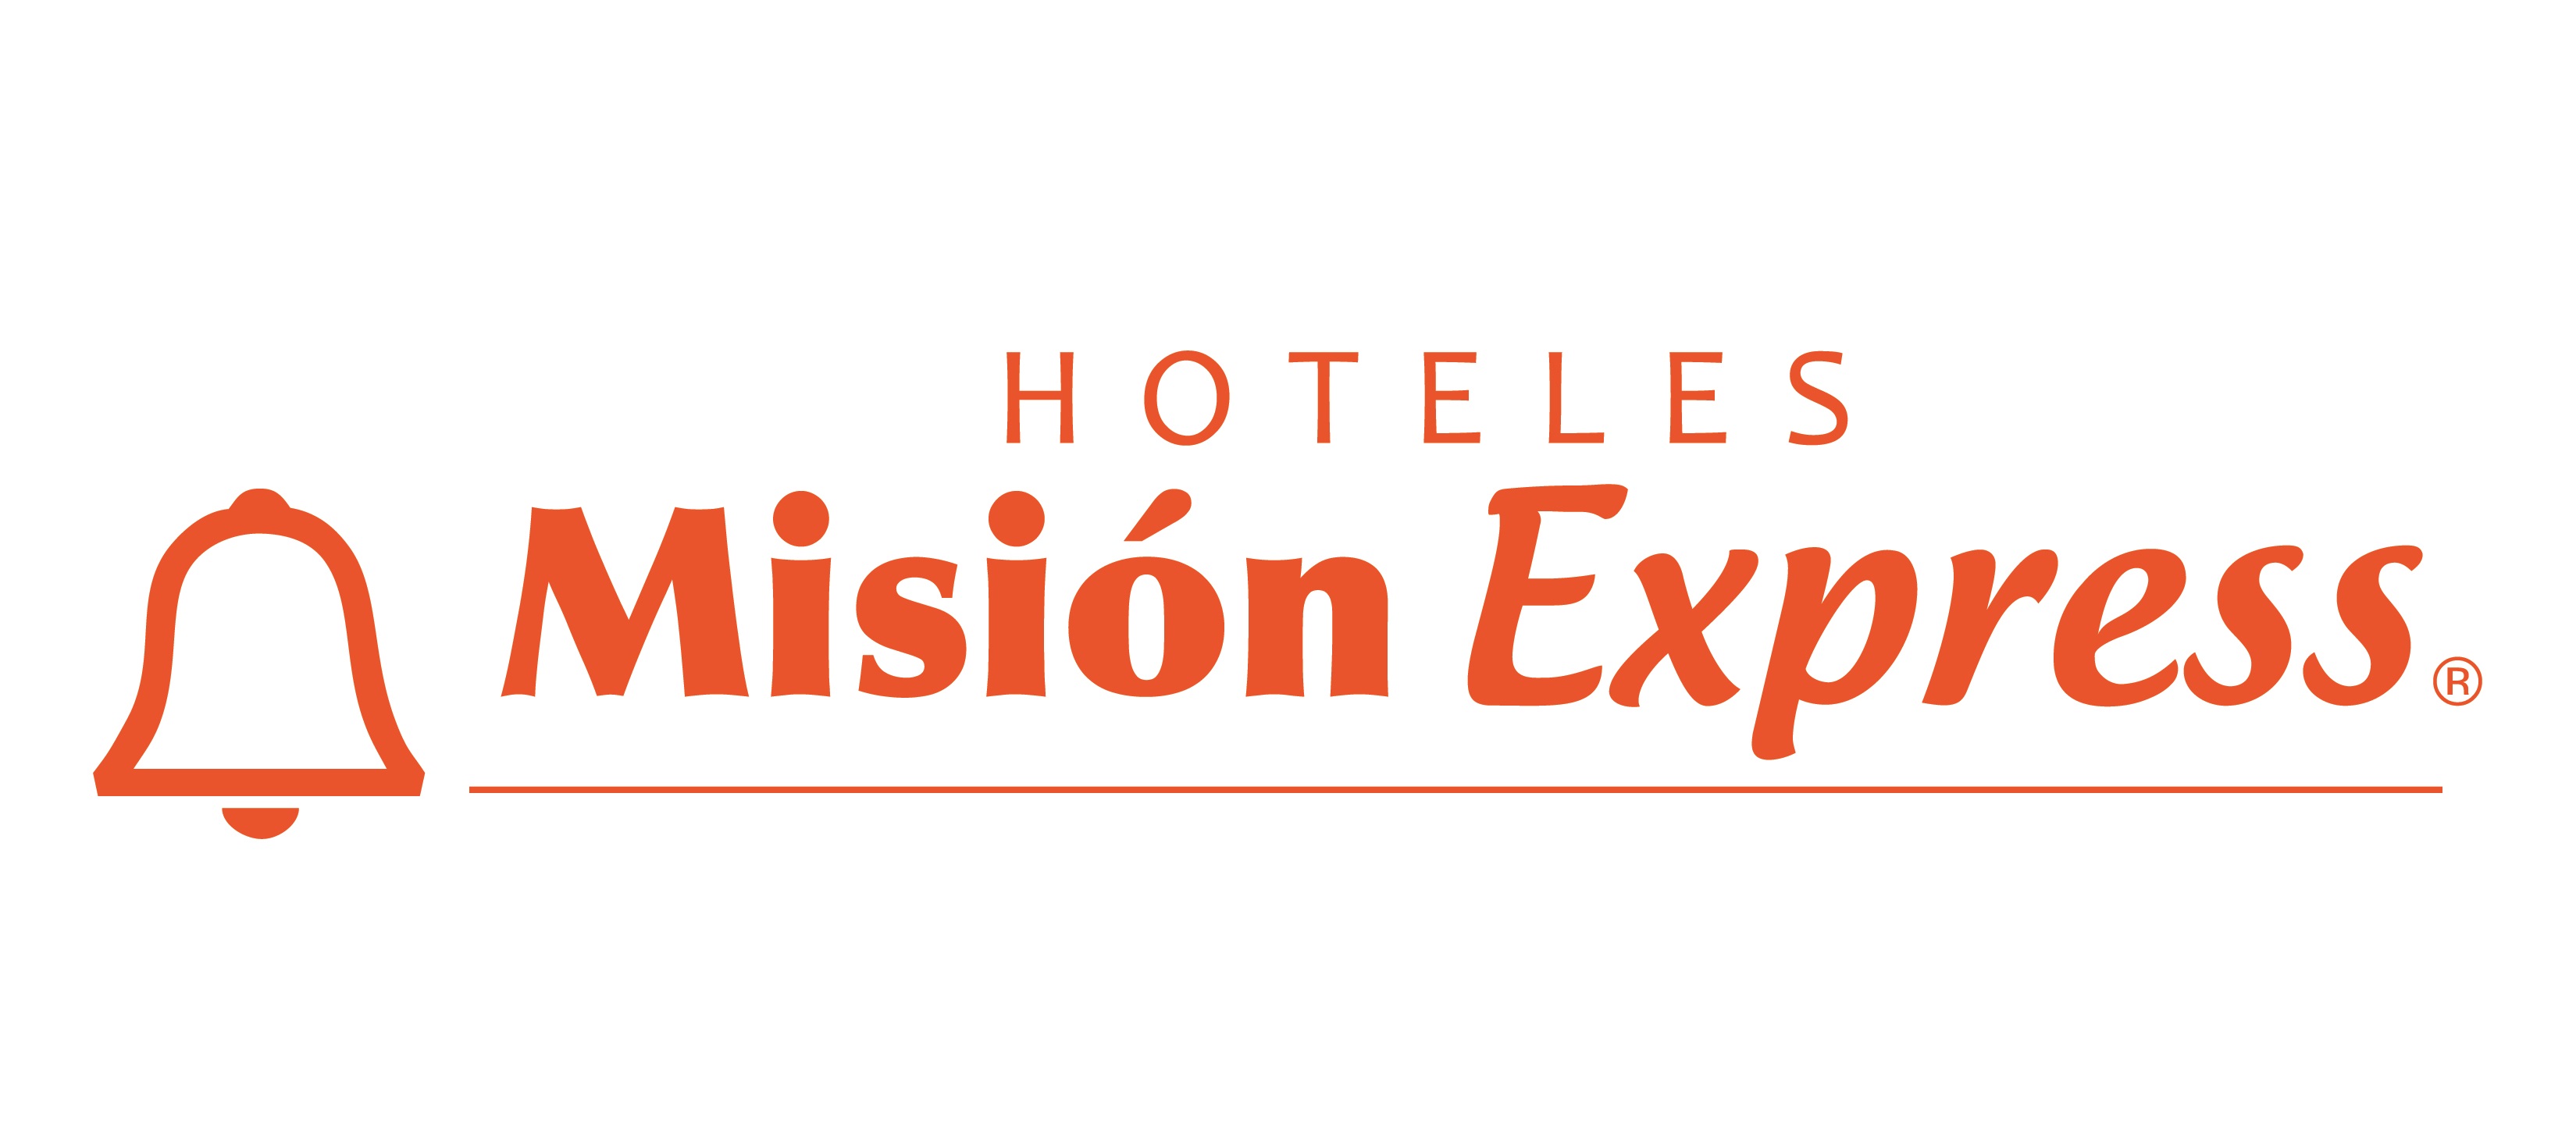 Hoteles Express